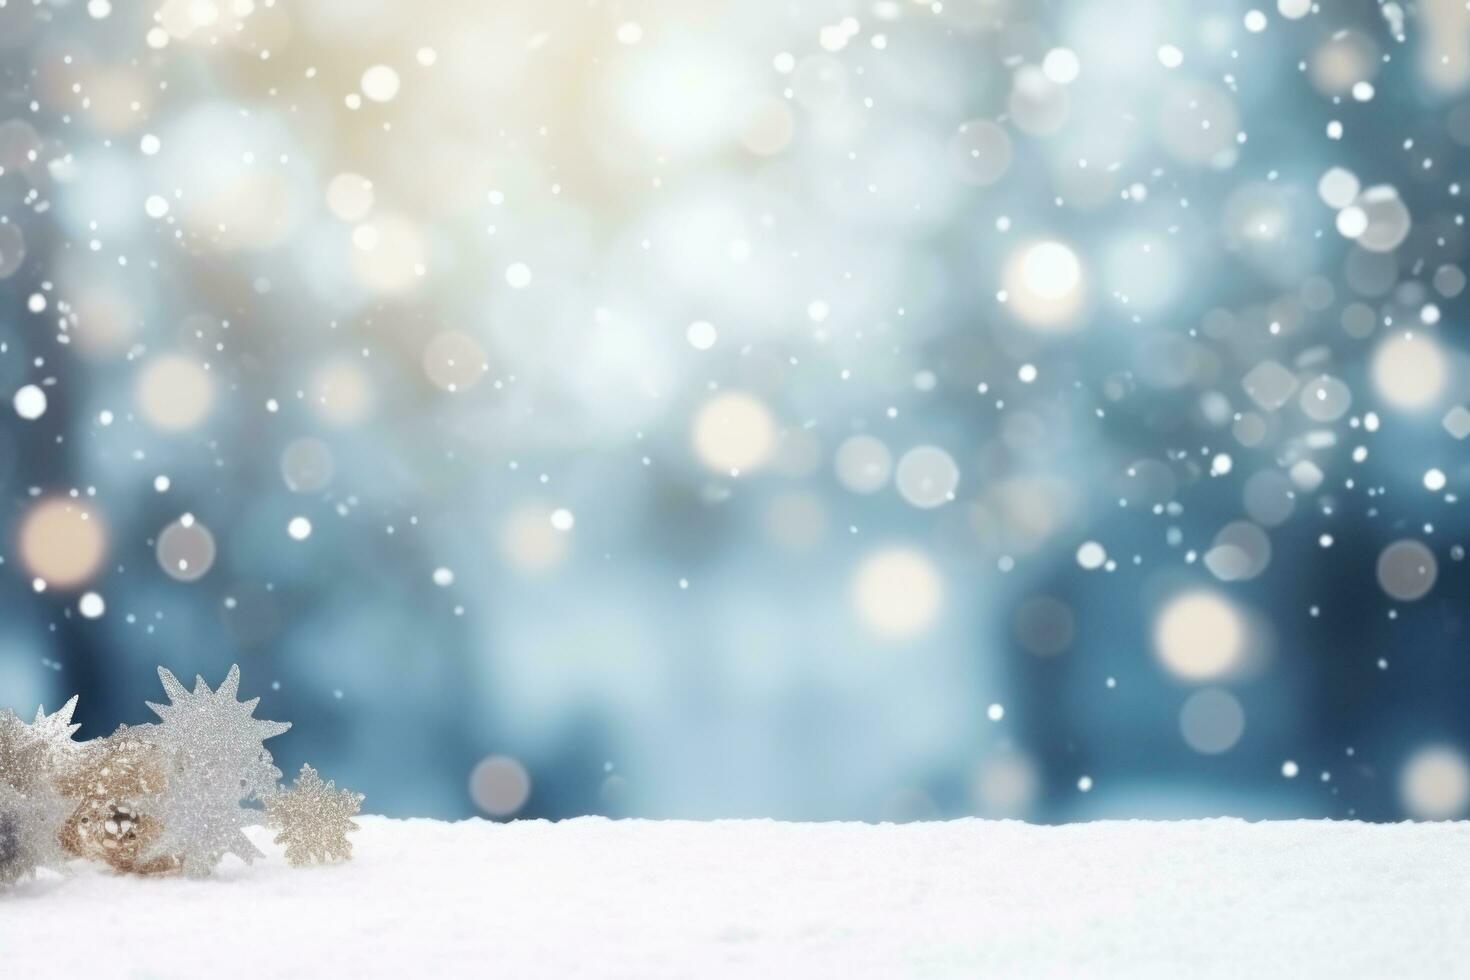 Blue White Christmas, Winter Background with Snow Flakes Stock